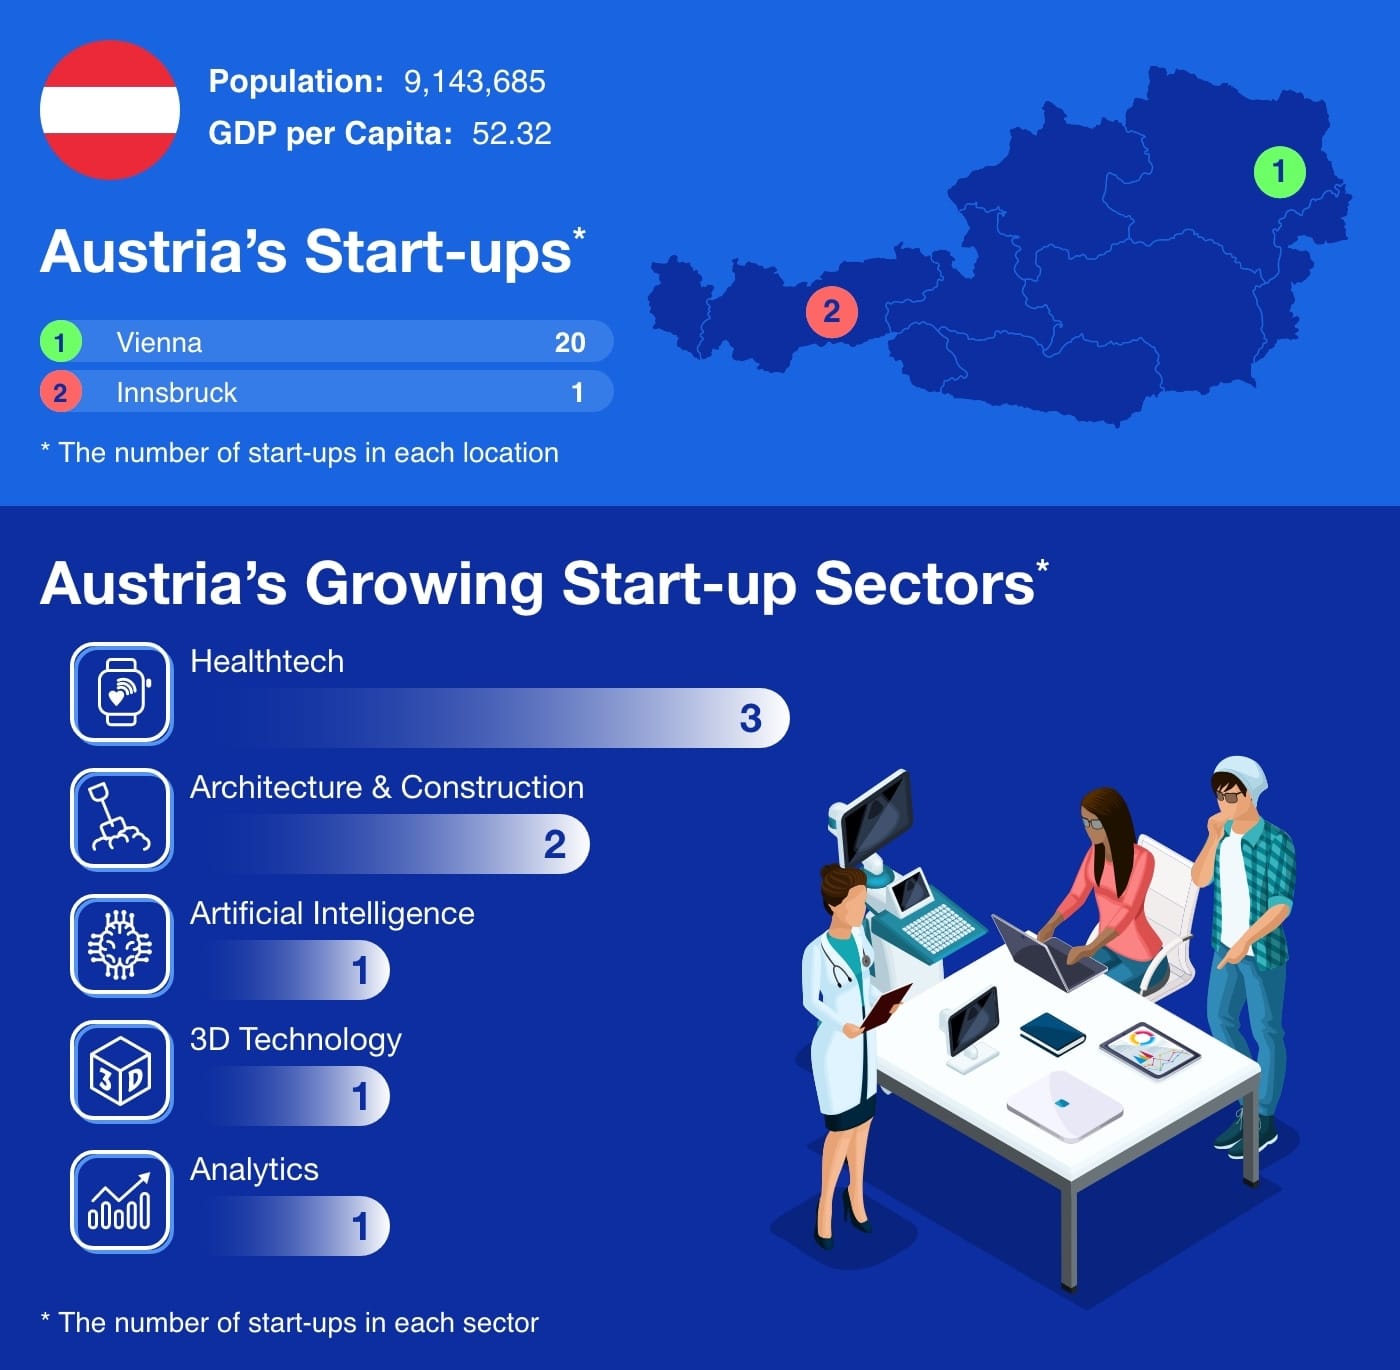 Infographic showing the number of Austria's start-ups by location and sector